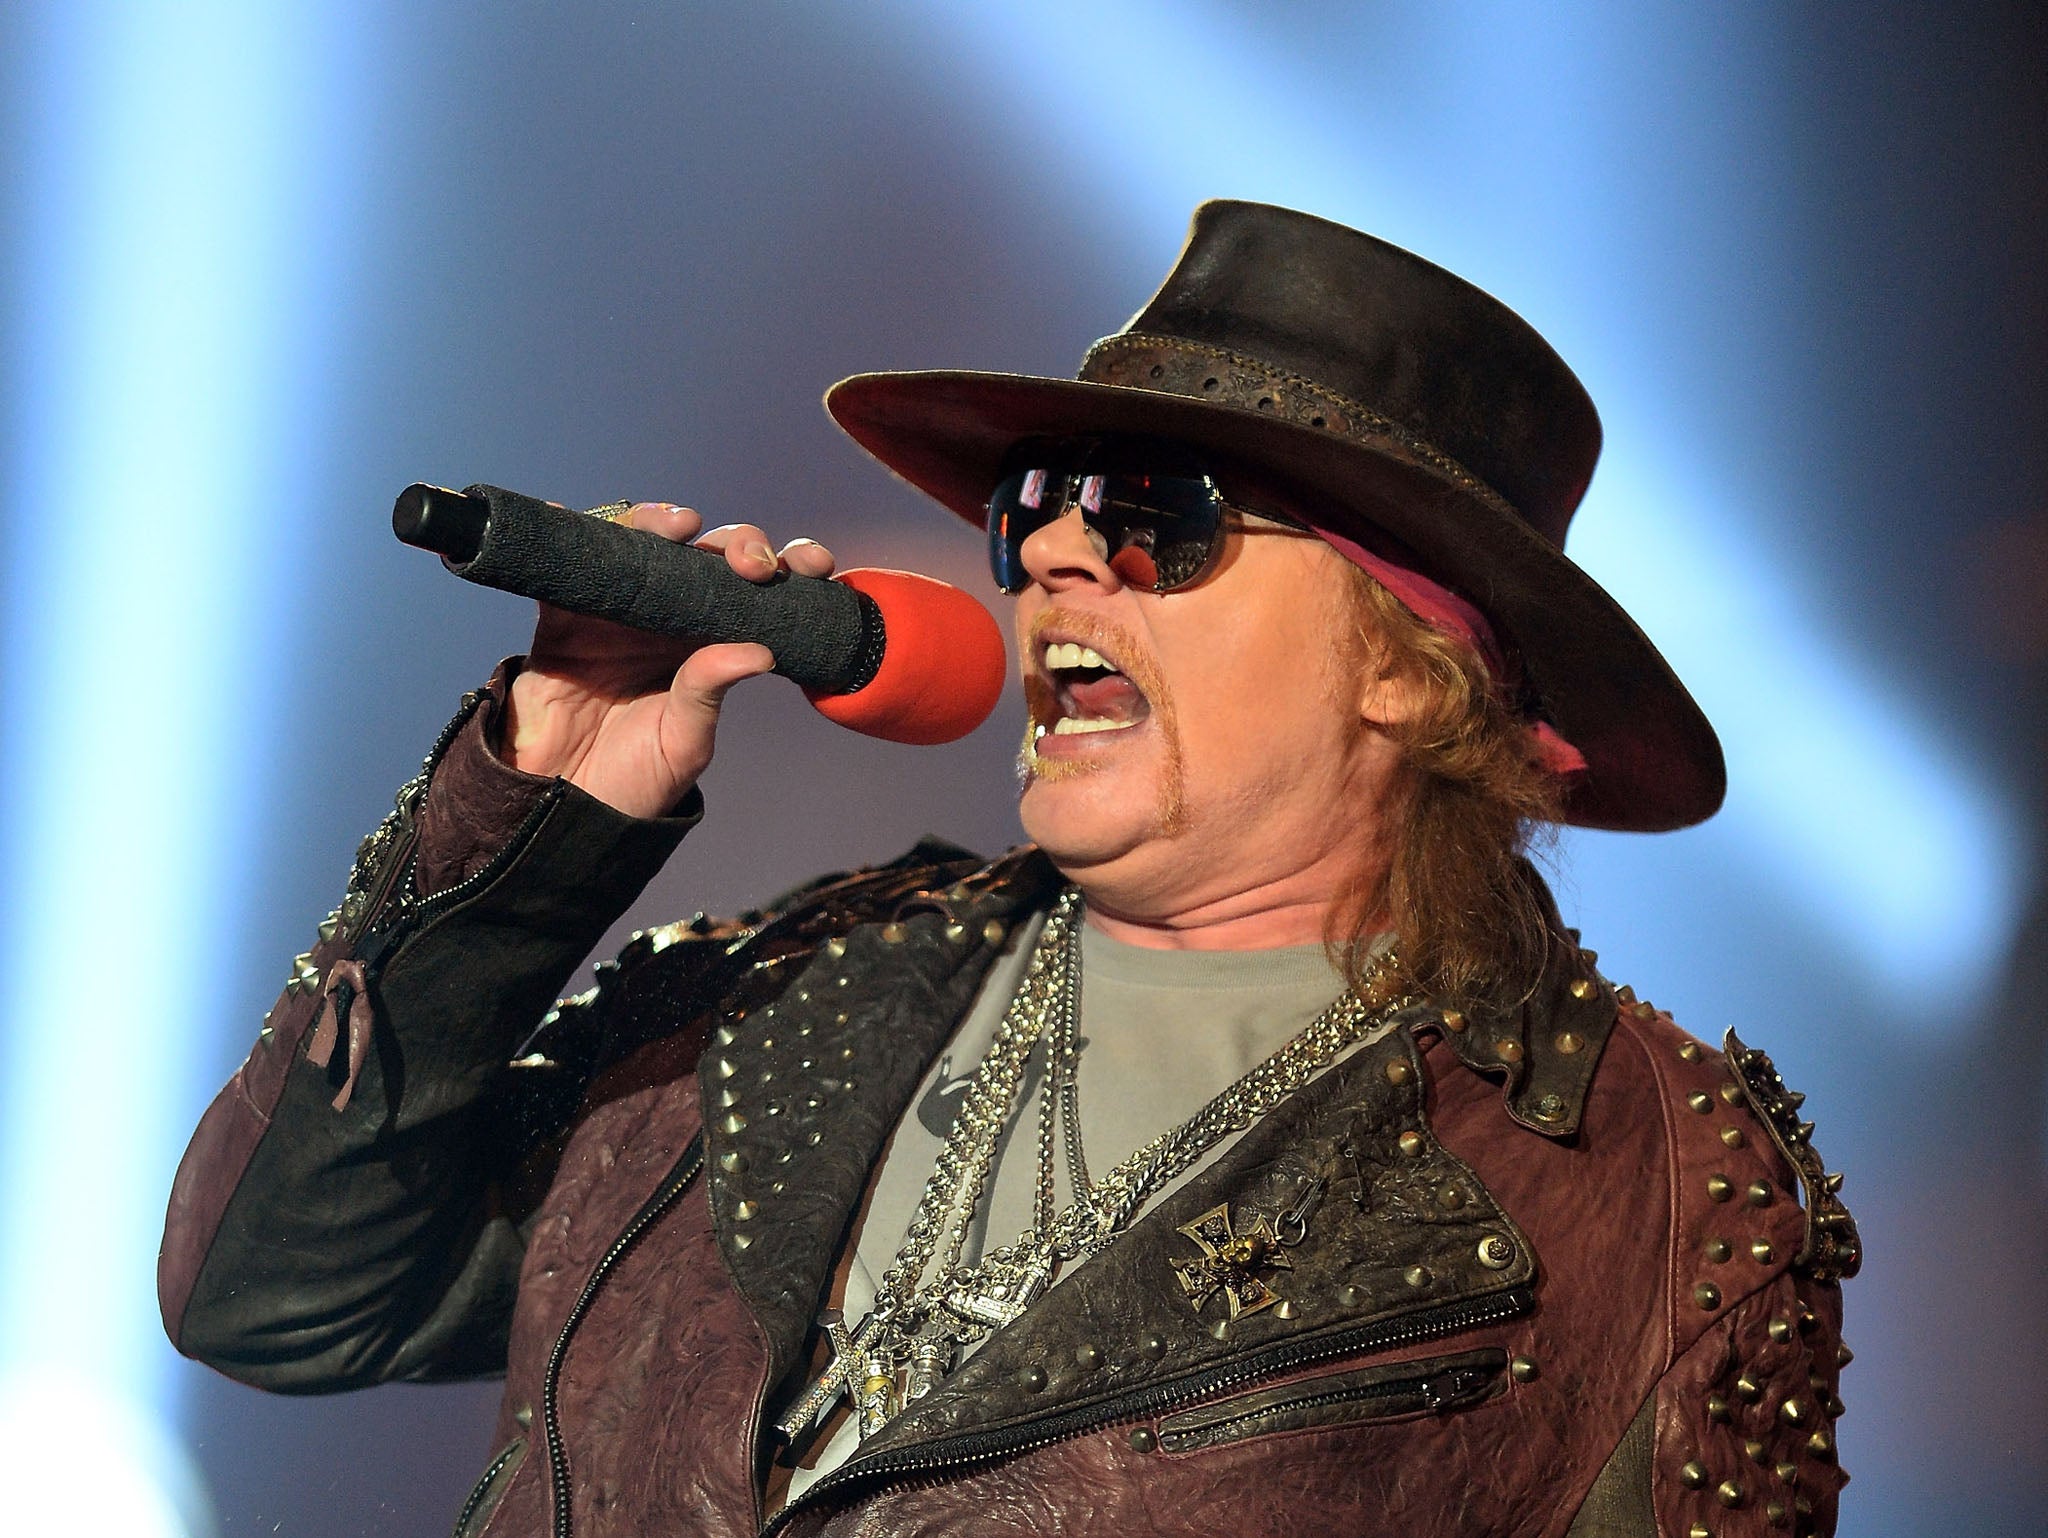 Axl Rose Is Not Dead Guns N Roses Singer Asks If I M Dead Do I Have To Pay Taxes The Independent The Independent